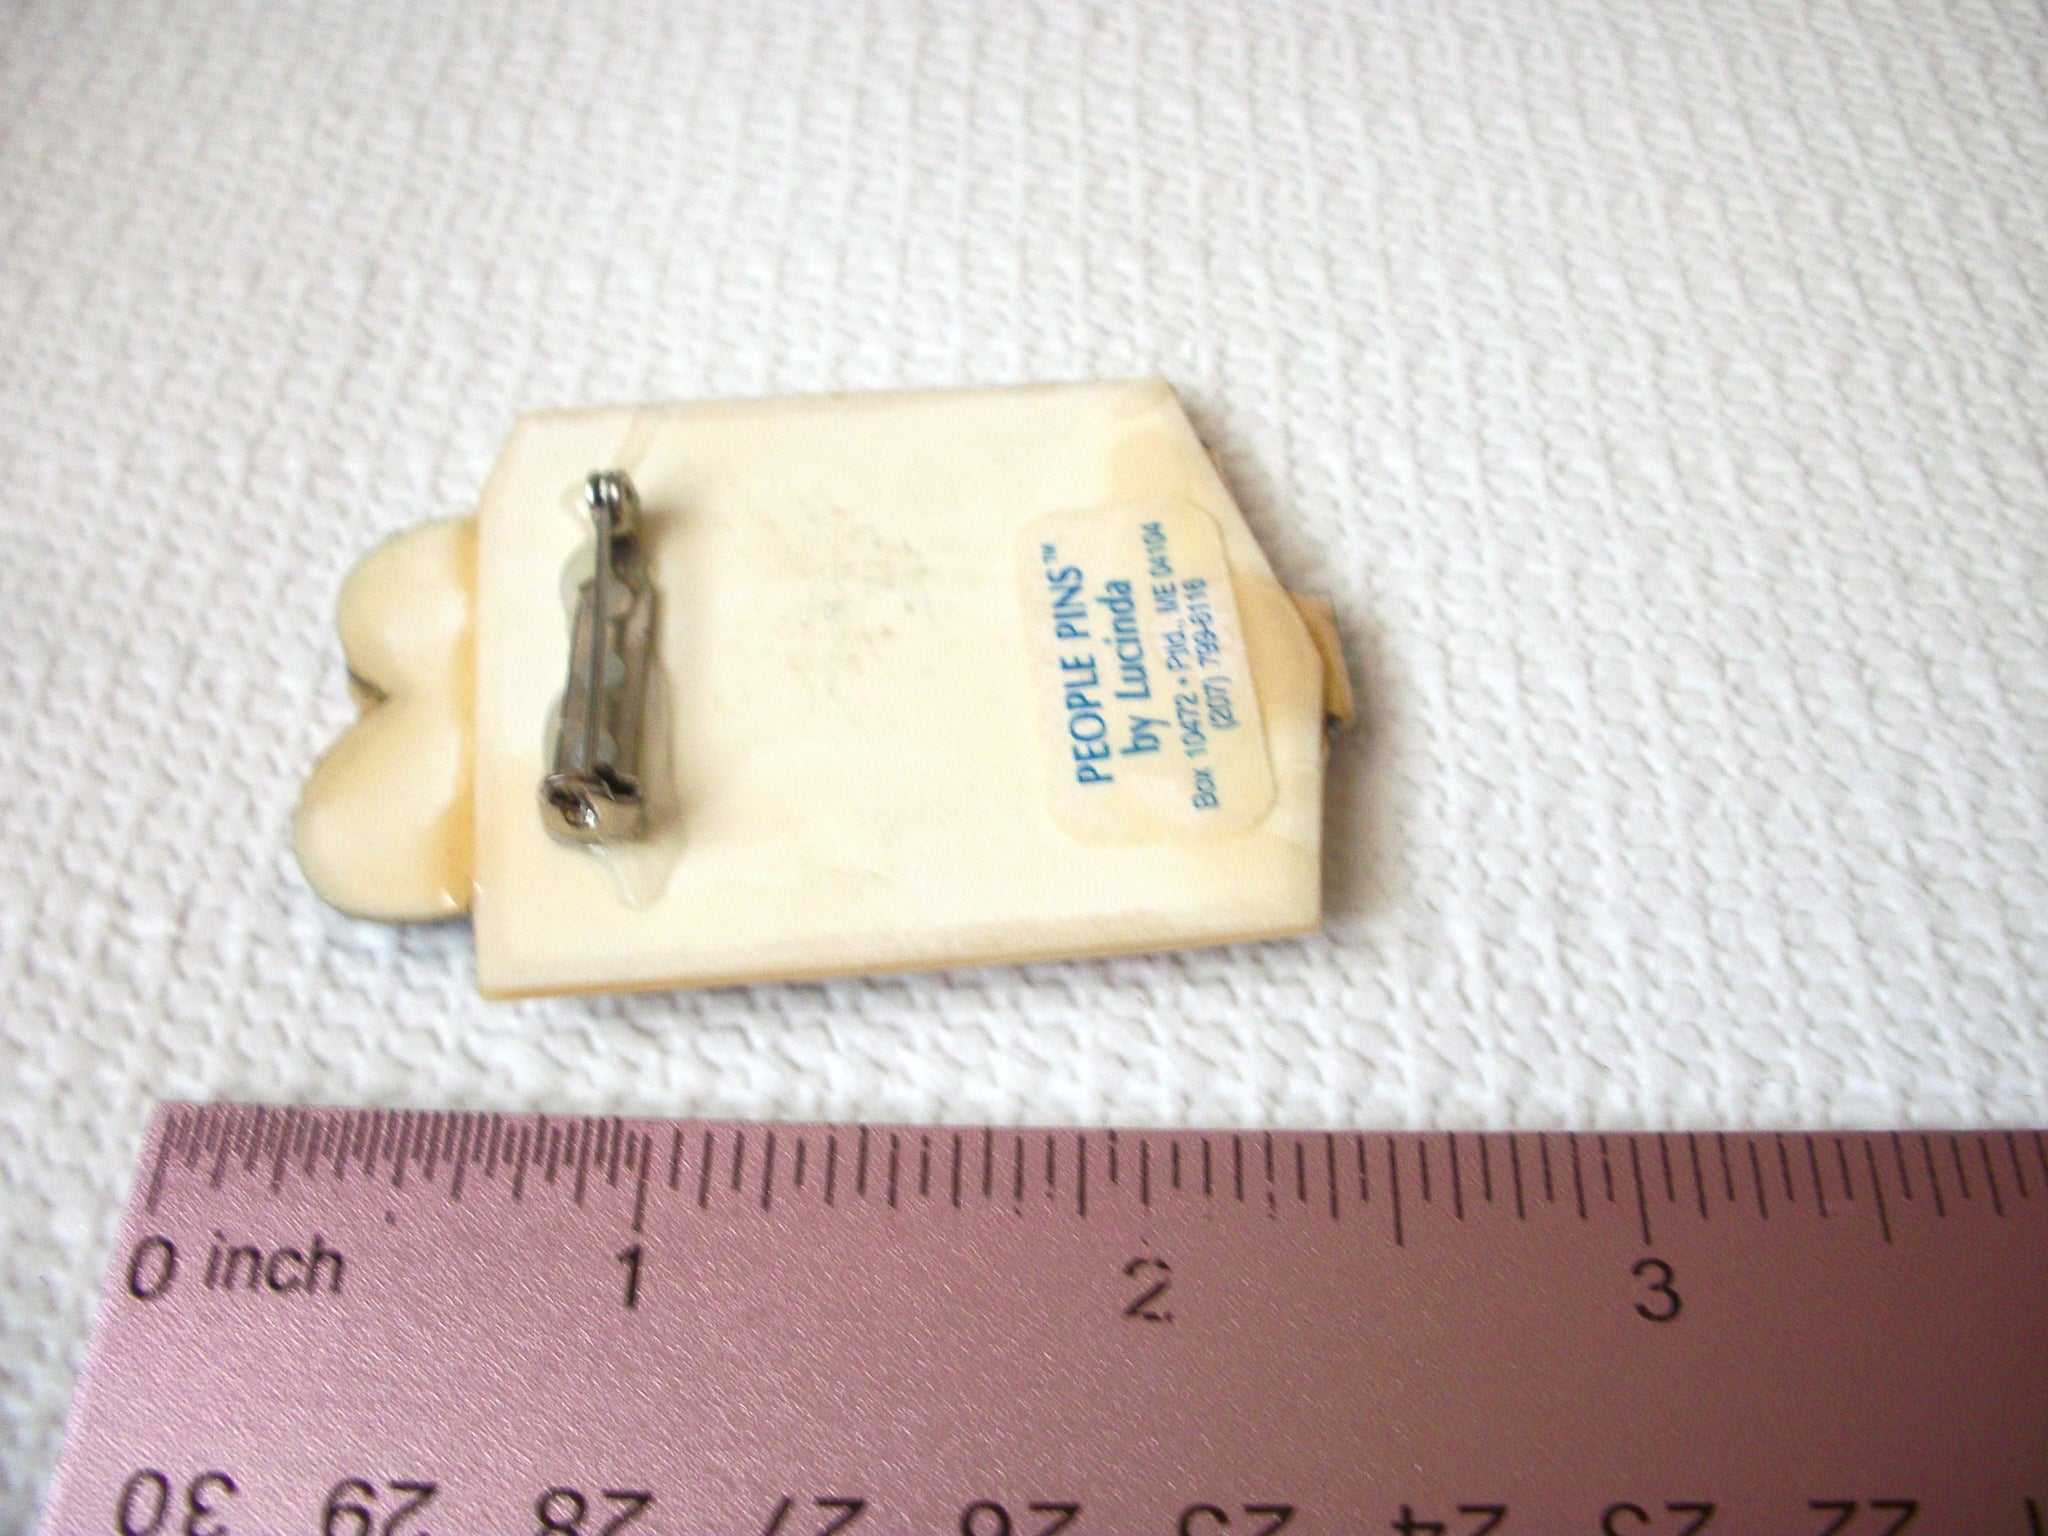 Vintage LUCINDA Pins, House Pins By Lucinda Pins Brooch 113016 Measuring 2 inches